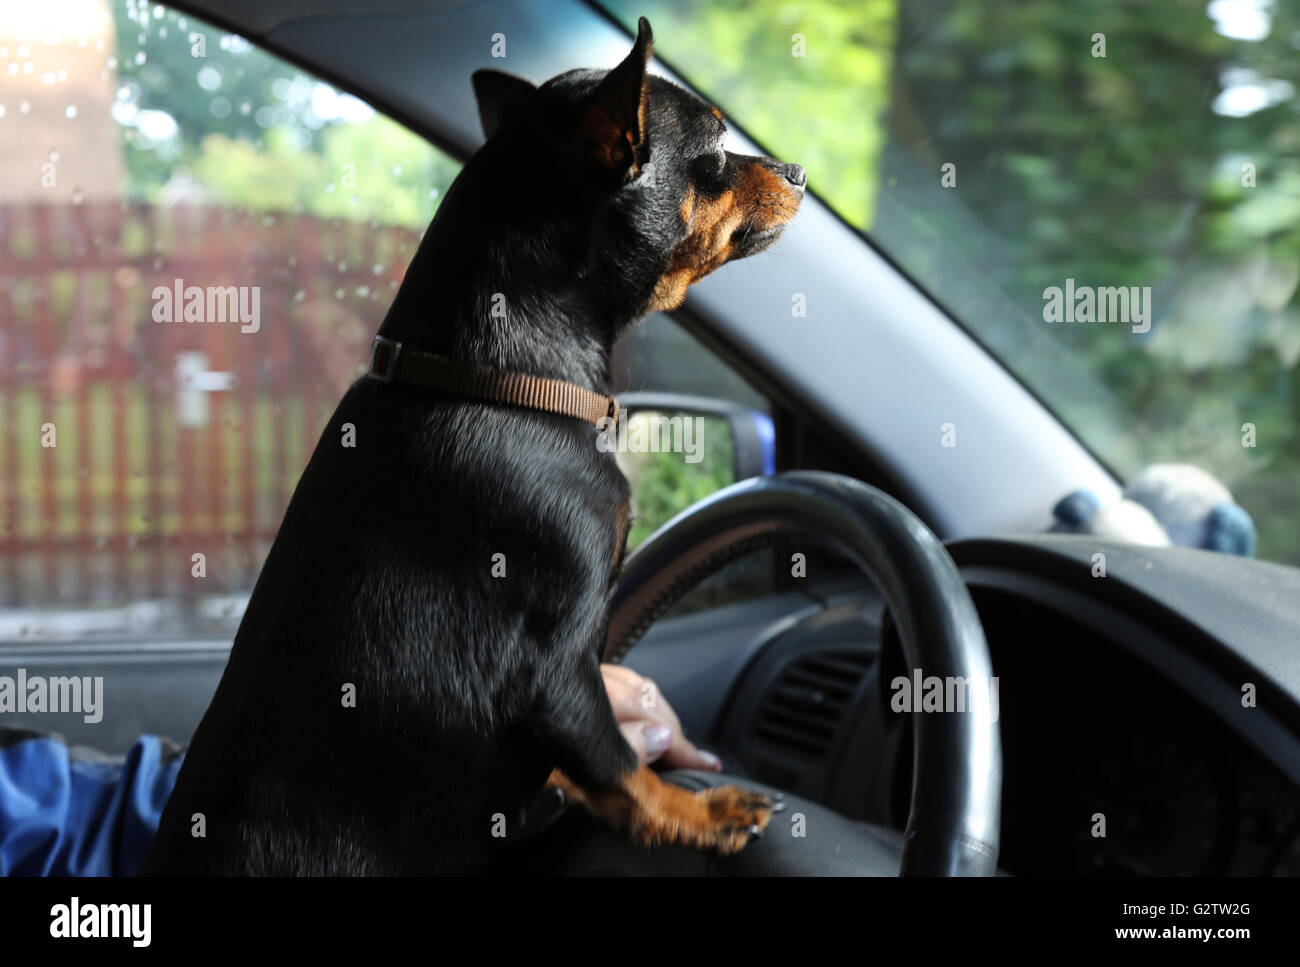 25.07.2015, Schwerin , Mecklenburg-Western Pomerania, Germany - Prague Ratter looking over the steering wheel of a car. 00S150725D804CAROEX.JPG - NOT for SALE in G E R M A N Y, A U S T R I A, S W I T Z E R L A N D [MODEL RELEASE: NOT APPLICABLE, PROPERTY RELEASE: NO, (c) caro photo agency / Sorge, http://www.caro-images.com, info@carofoto.pl - Any use of this picture is subject to royalty!] Stock Photo